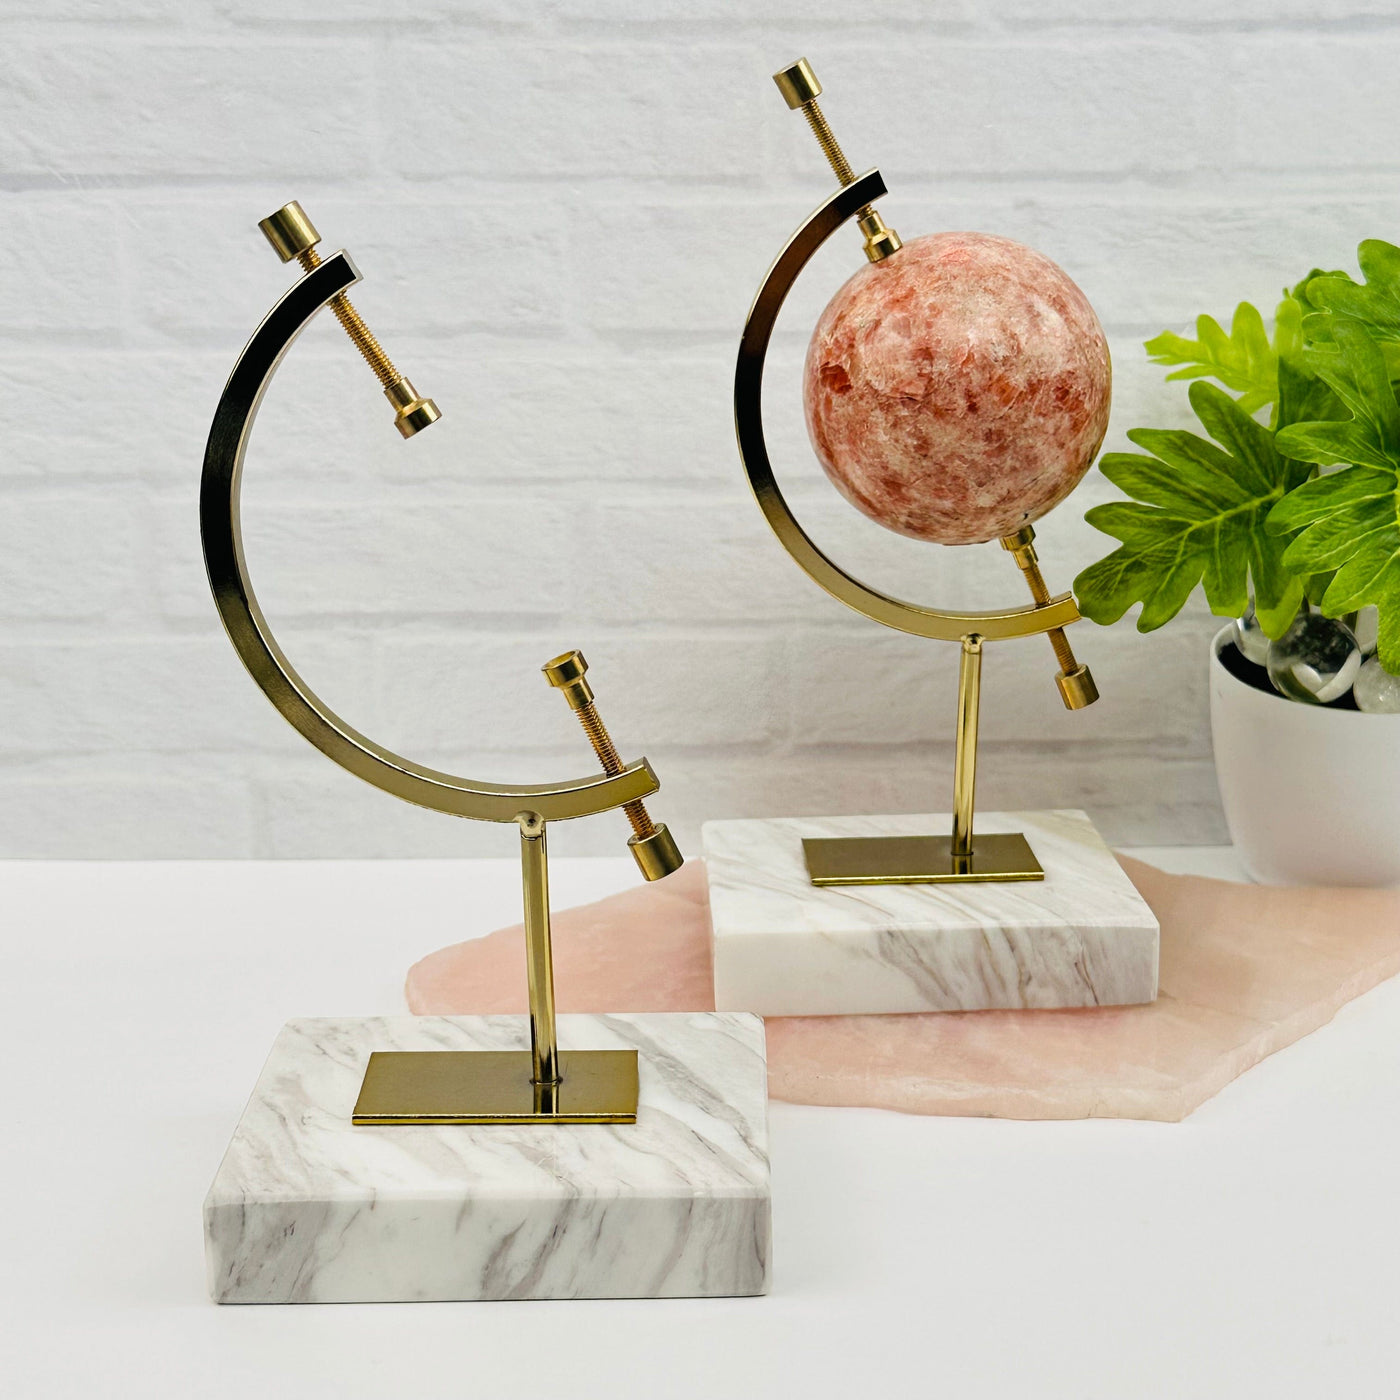 Sphere Holder with Caliper on White Marble Base - Stone Crystal Display